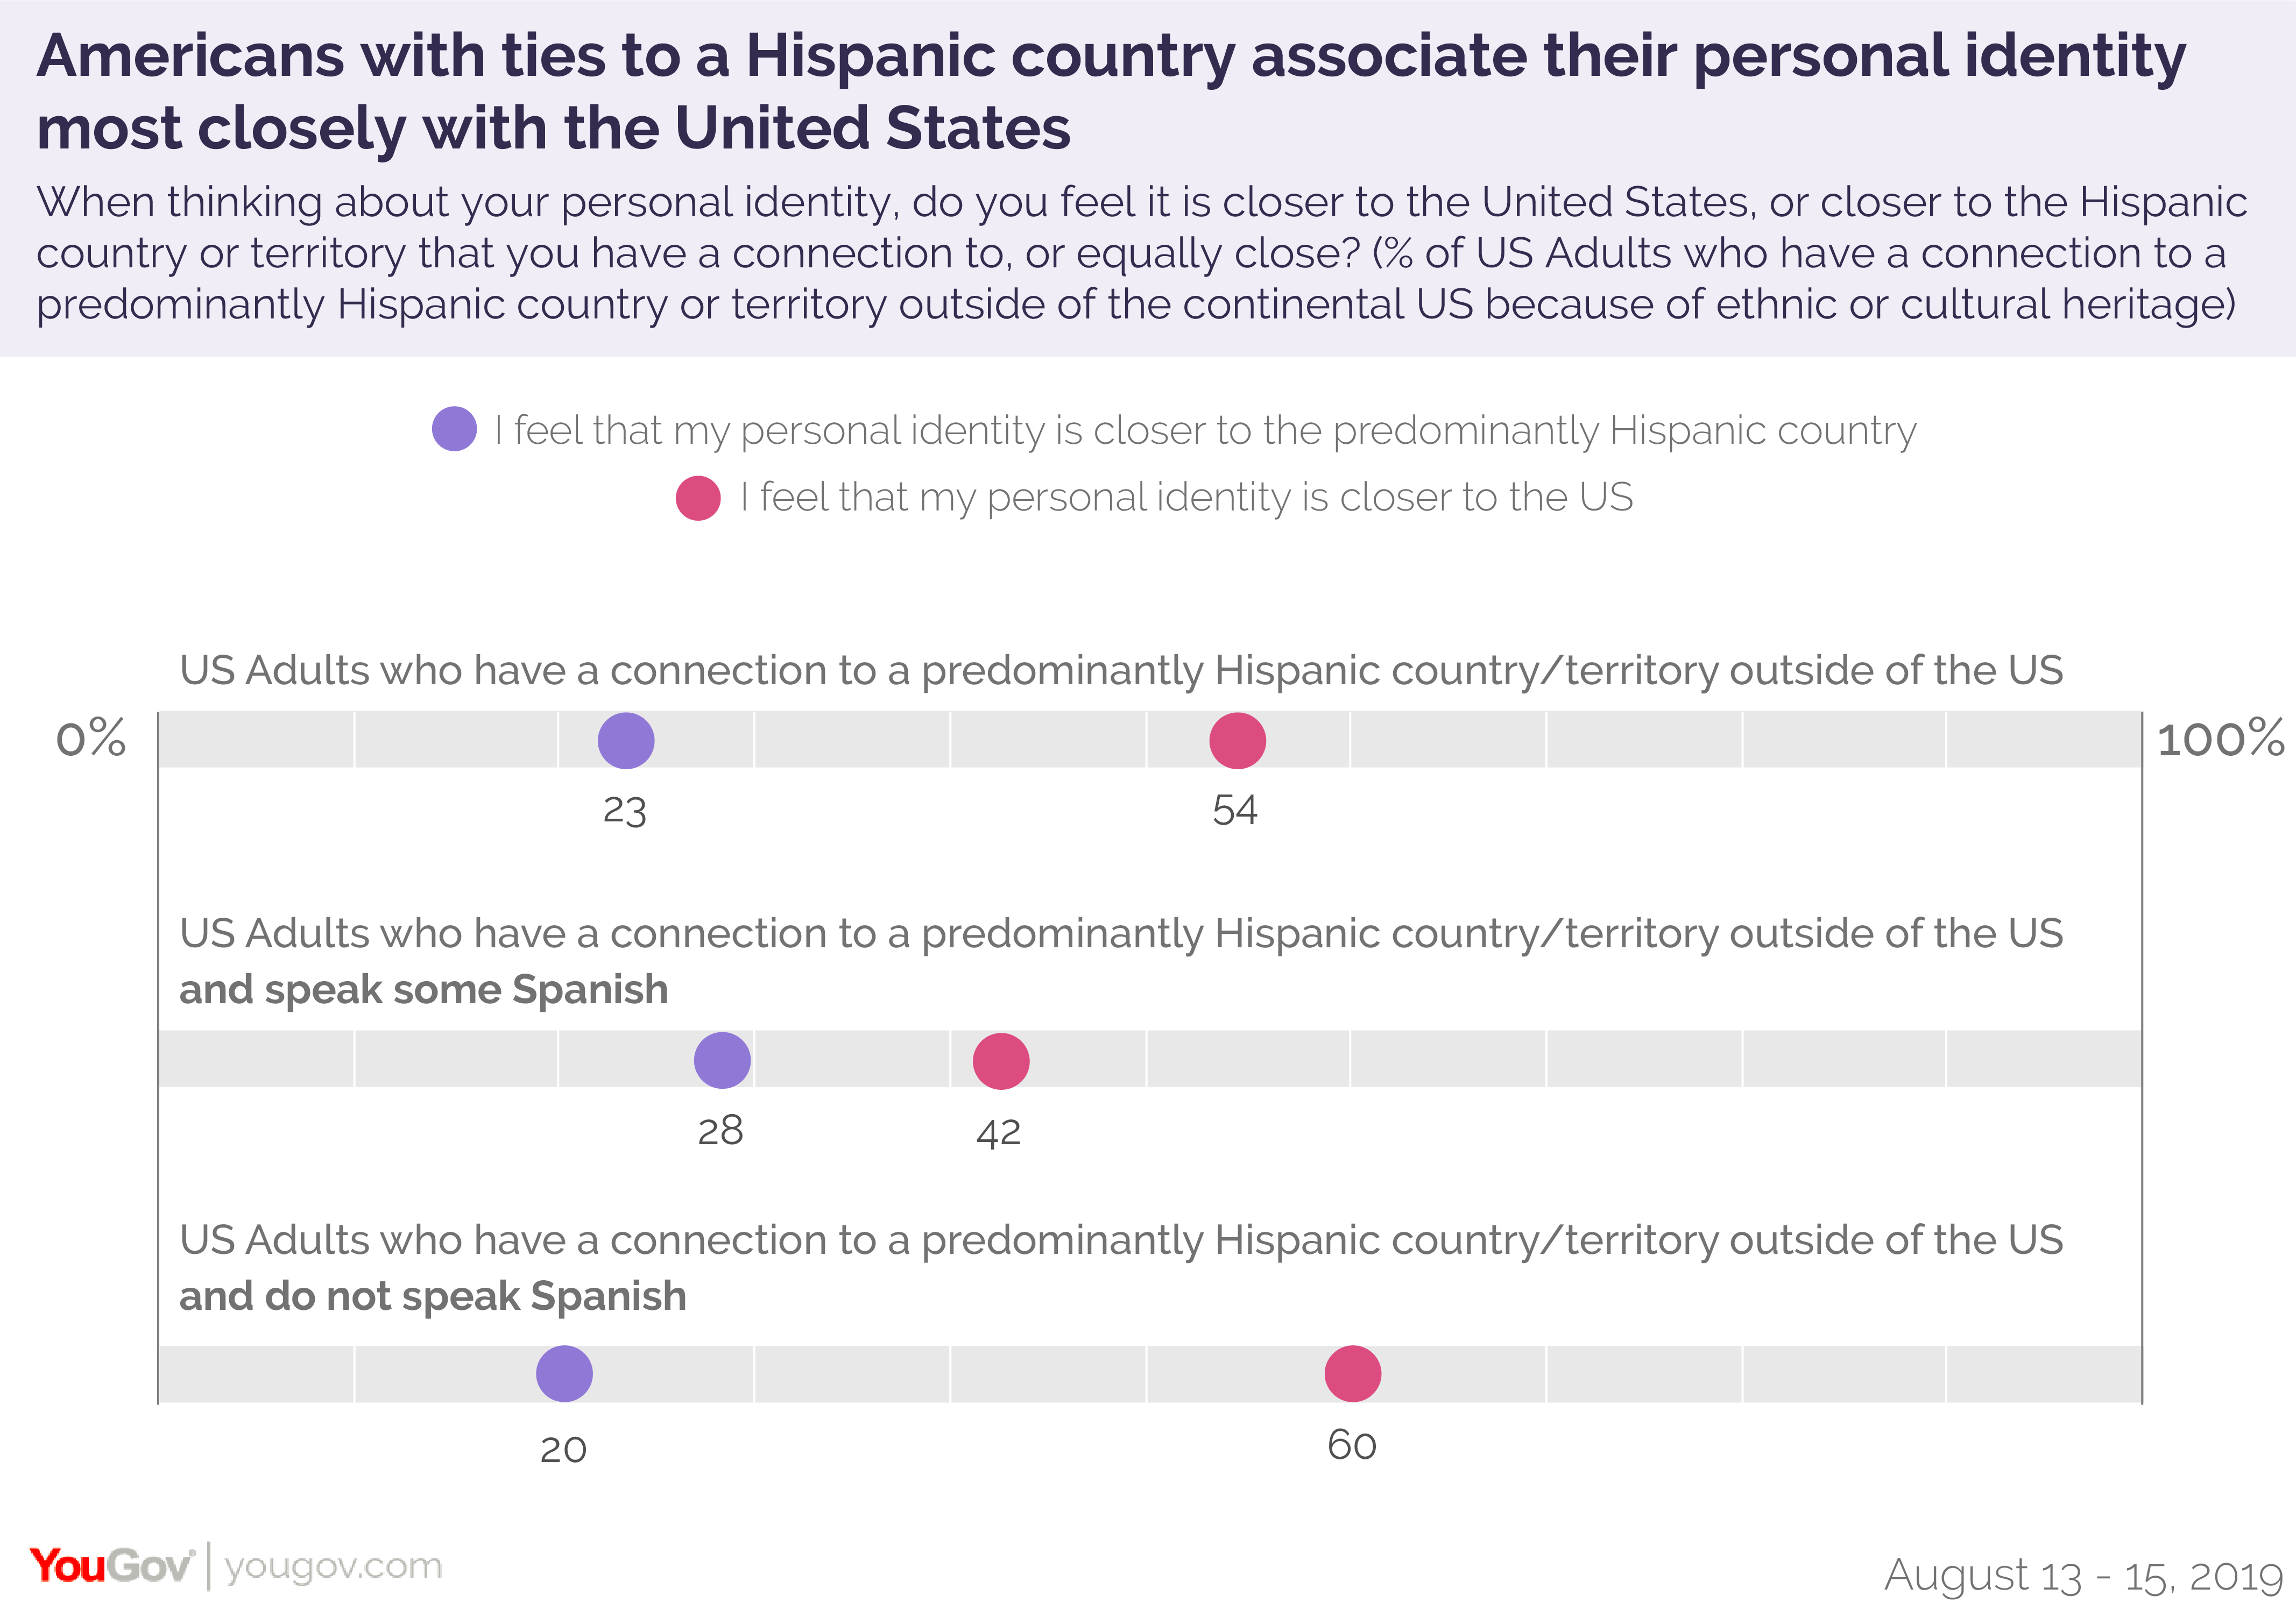 Americans with ties to a Hispanic country associate their personal identity most closely with the United States